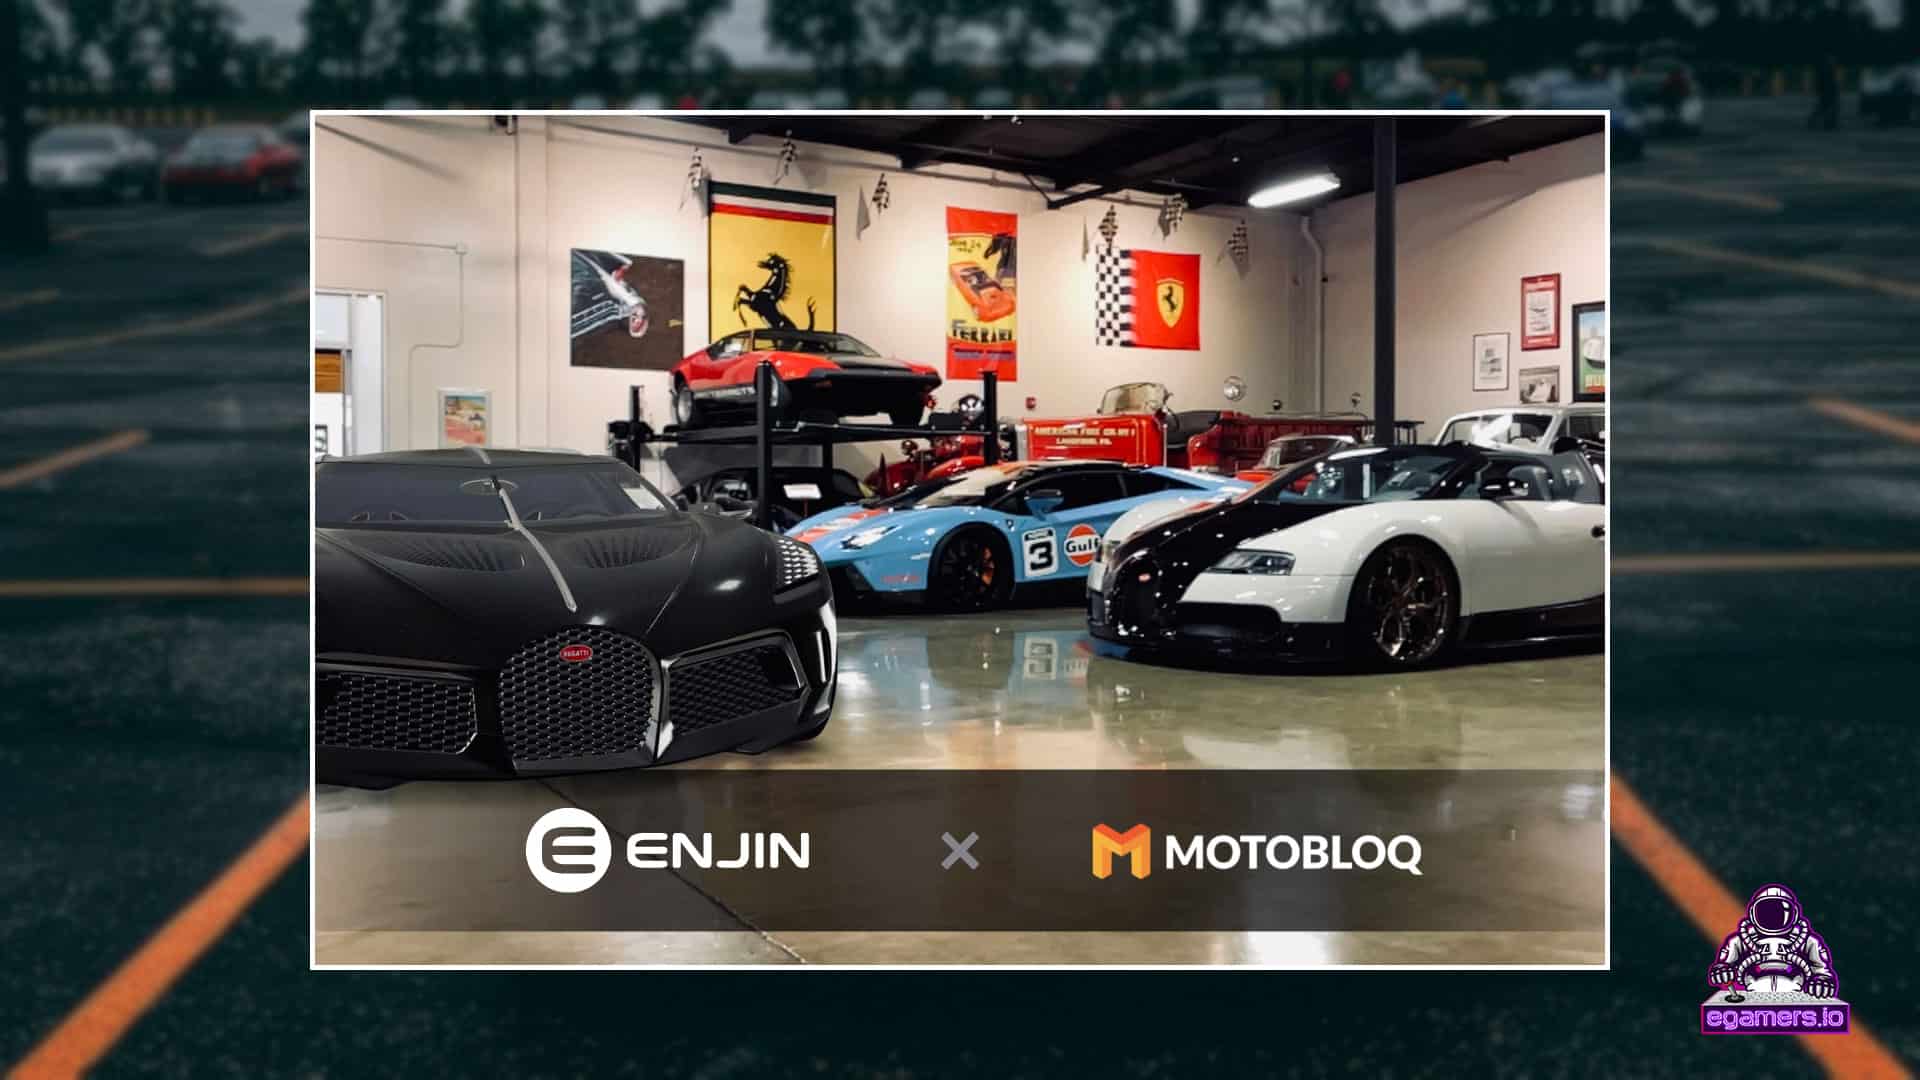 motobloq enjin MotoBloq is a marketplace for digital vehicle collectibles where you can collect and show-off the garage of your dreams using augmented reality (AR) has joined the Enjin ecosystem.